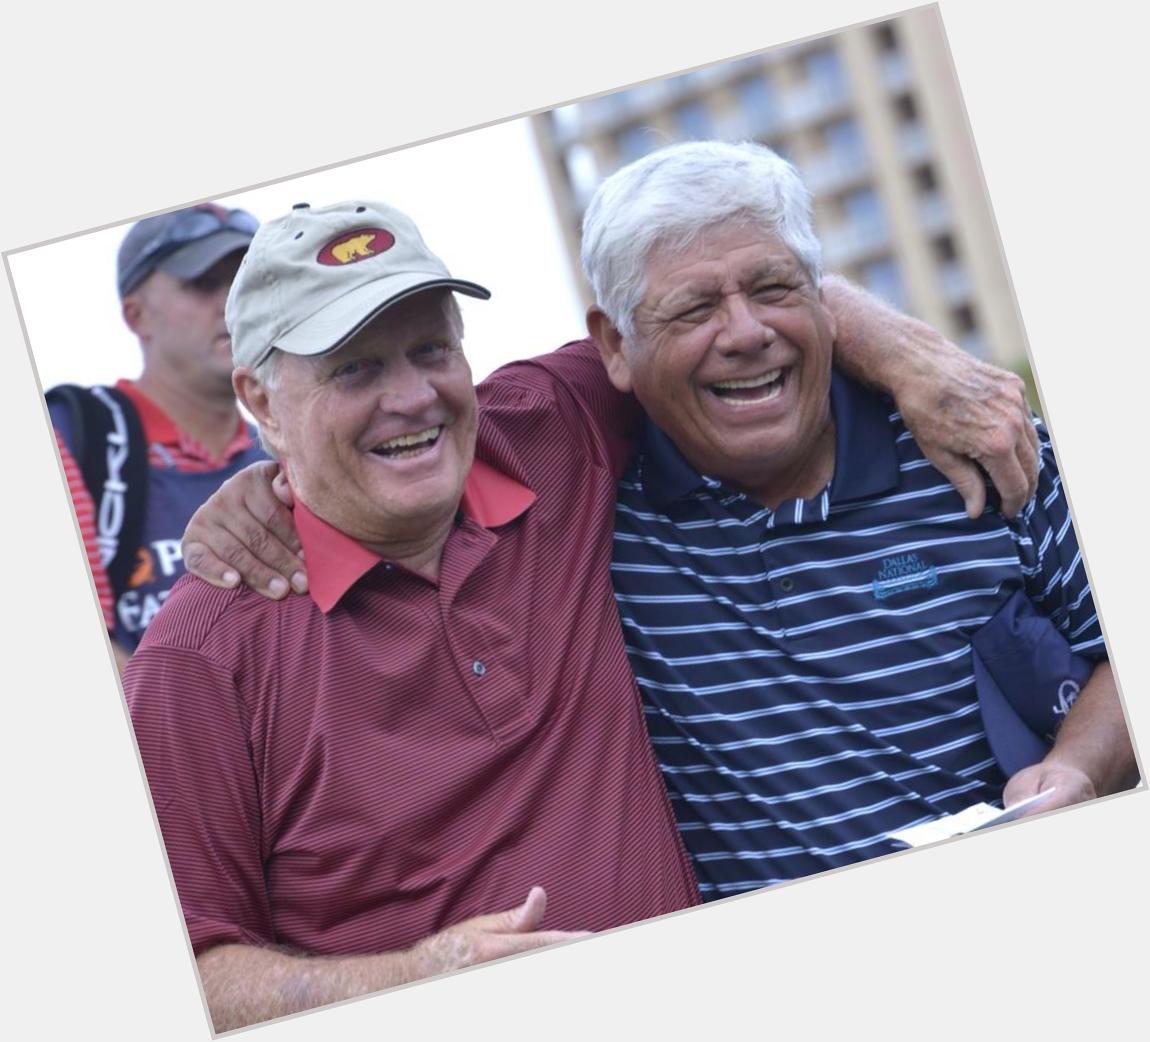 Happy 75th Birthday to Lee Trevino. Had the pleasure of watching him play at Muirfield when Faldo won in 1992. 